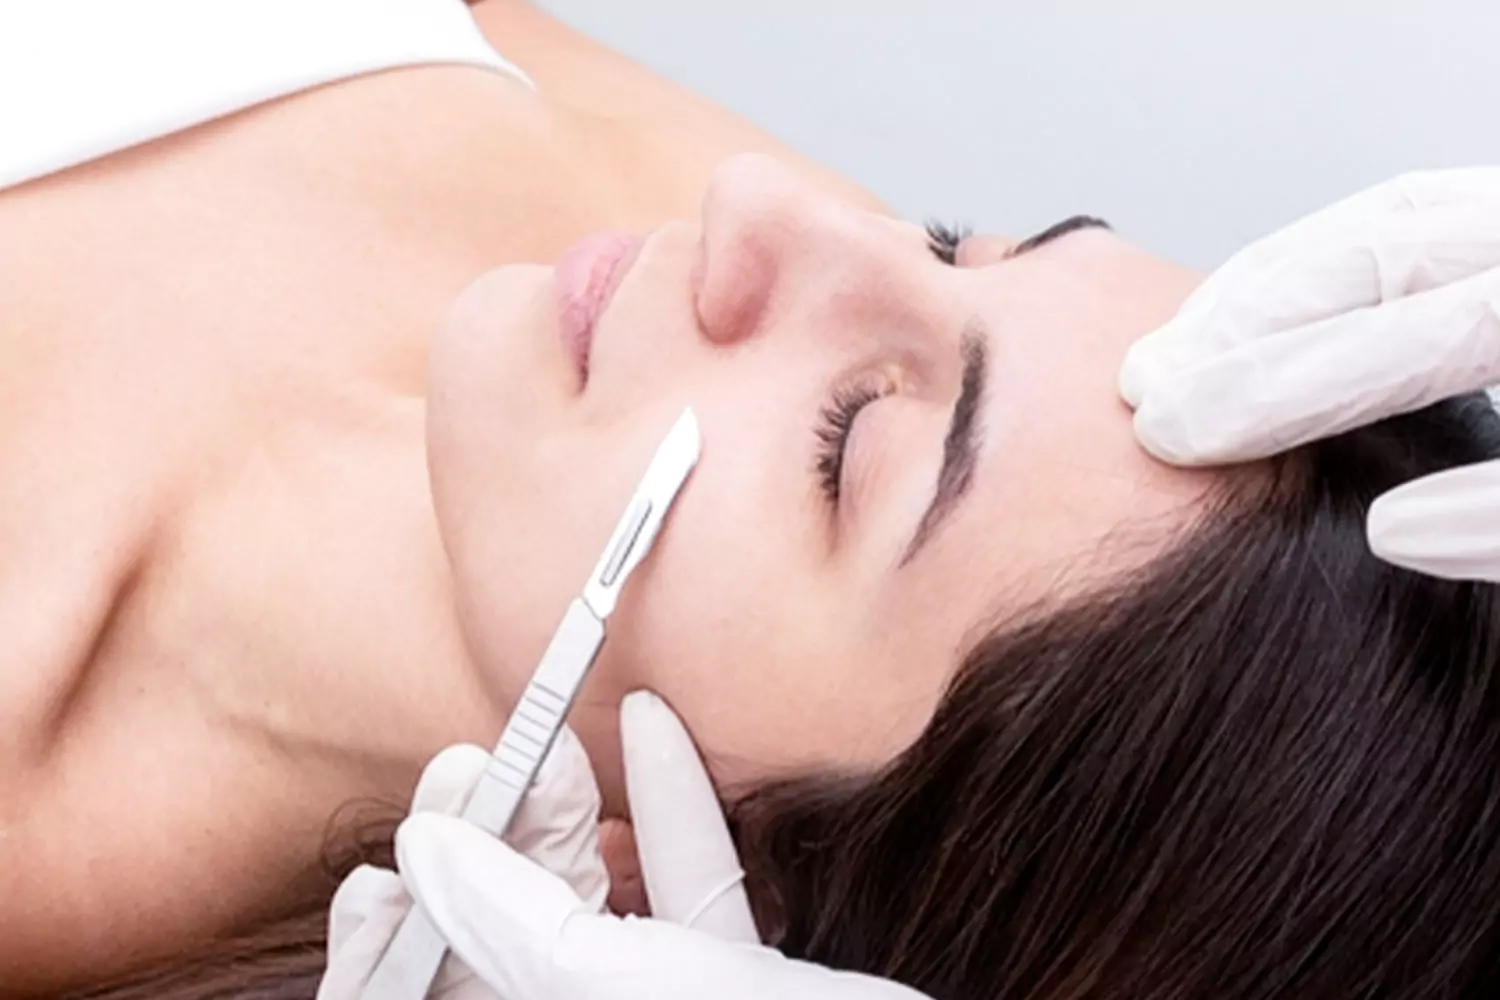 Discover The Best Frequency For Dermaplaning: How Often Should You Do It?